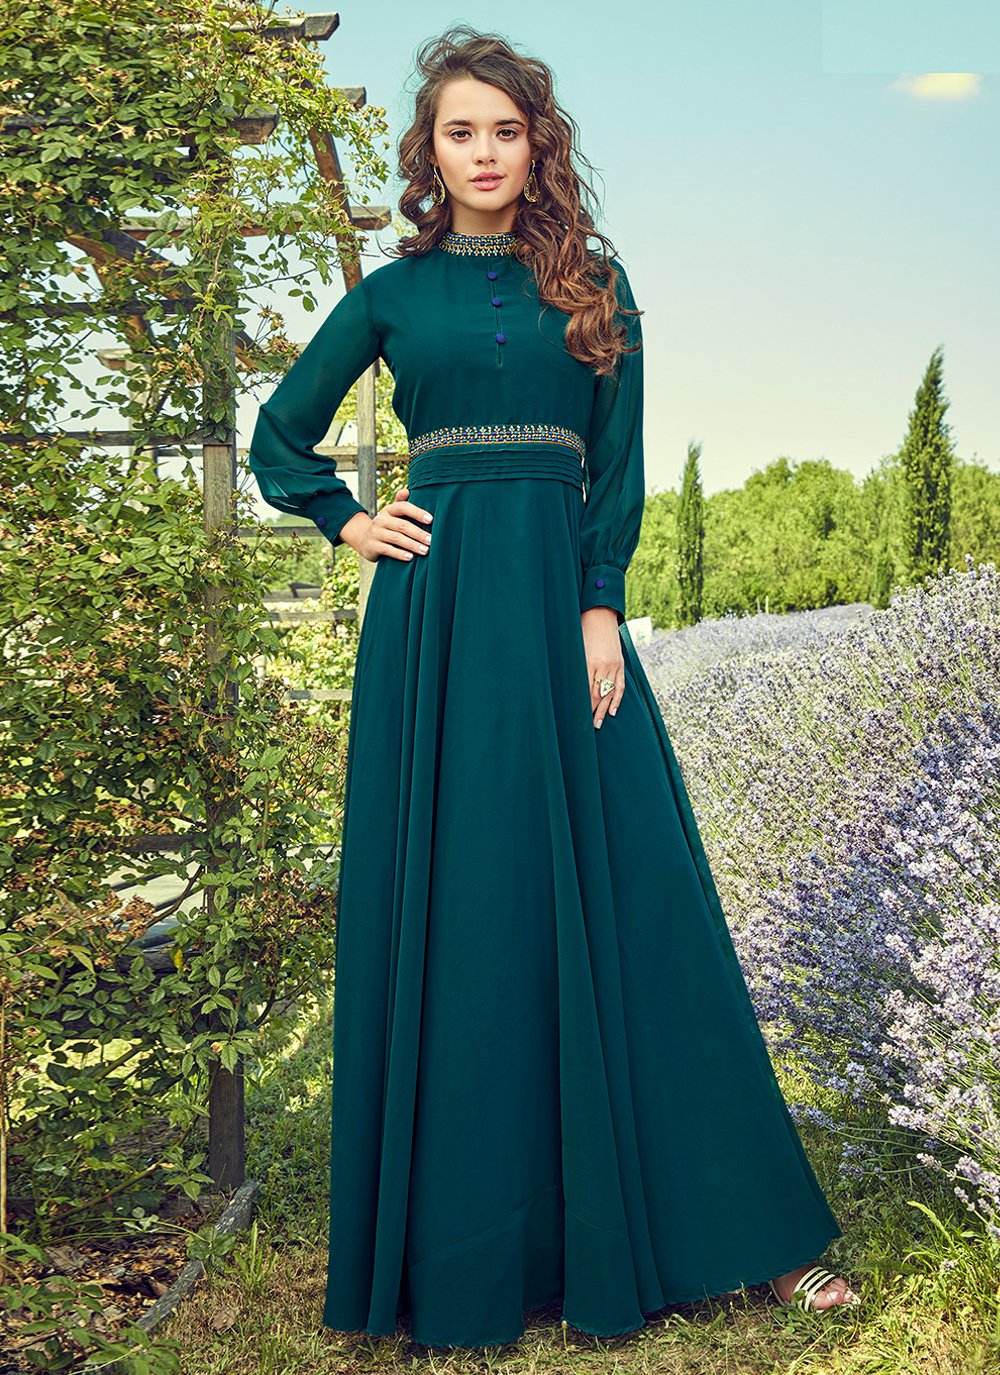 Gown Georgette Teal Plain Gown